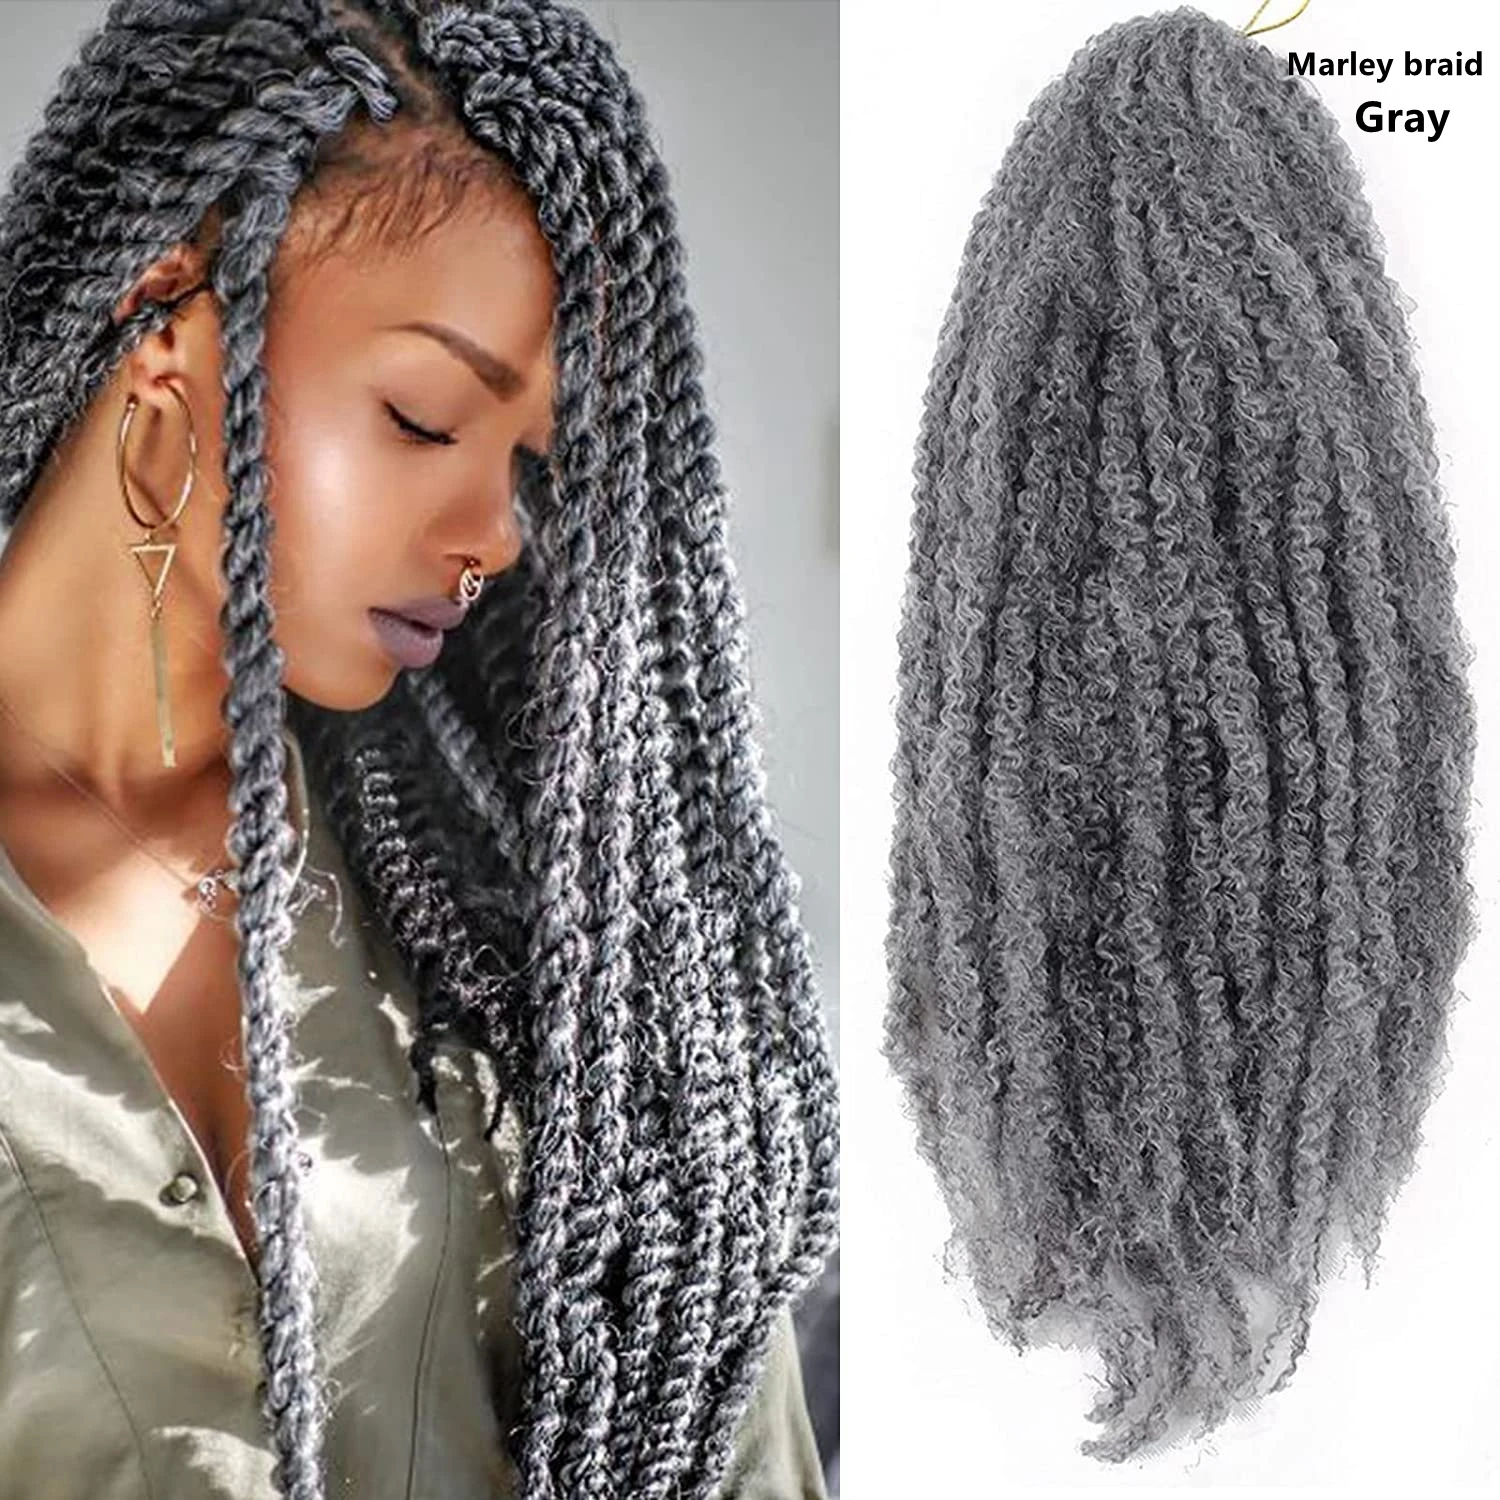 Marley Hair 24 Inch Springy Afro Twist Hair 8 Packs India | Ubuy